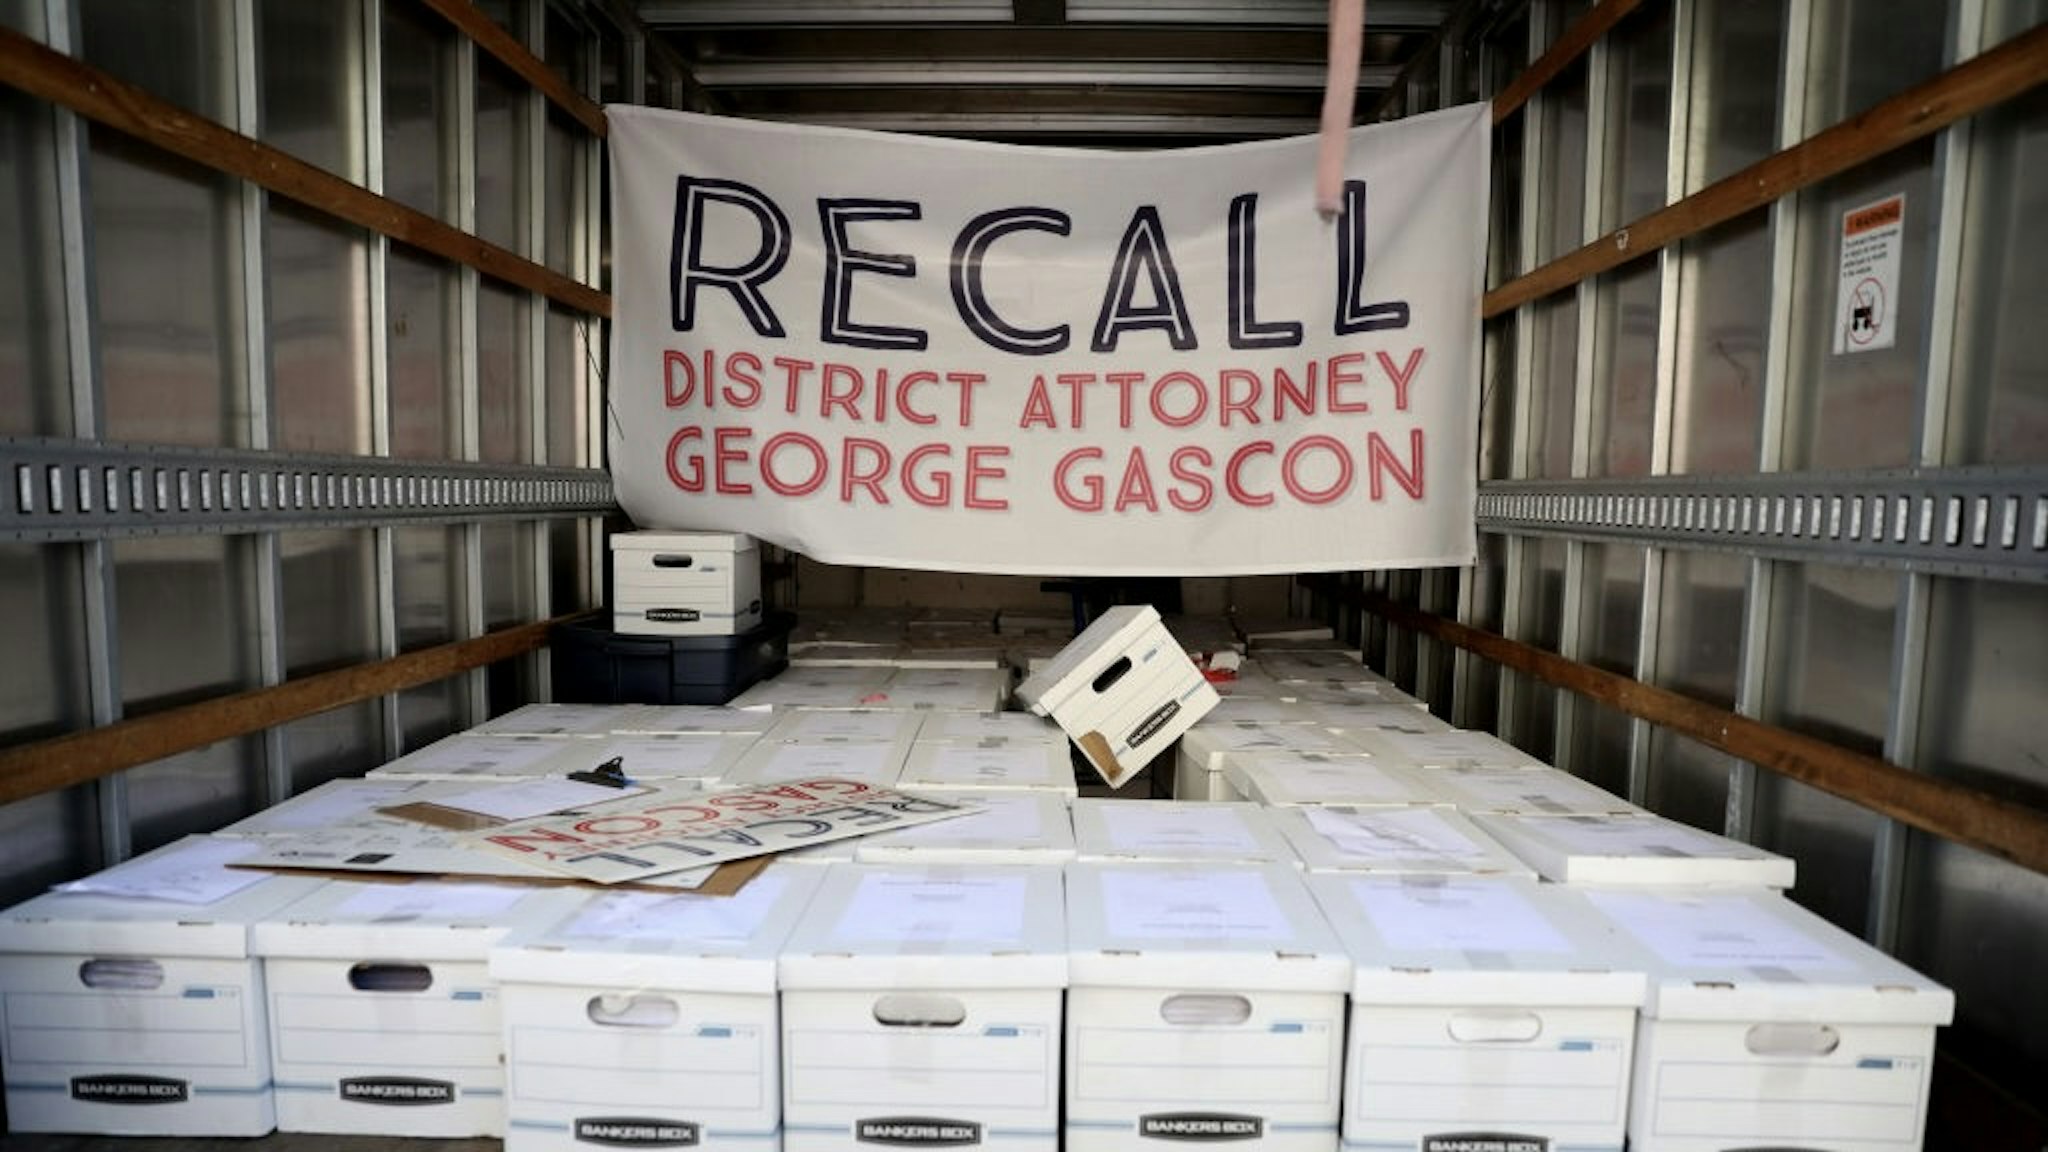 petition to recall Los Angeles County District Attorney George Gascón NORWALK, CA - JULY 06: A truck arrives with over 700,000 petition signatures in an effort to recall Los Angeles County District Attorney George Gascón to be submited to the County of Los Angeles Registrar Recorder/County Clerk office on Wednesday, July 6, 2022 in Norwalk, CA. (Gary Coronado / Los Angeles Times via Getty Images) Gary Coronado / Contributor